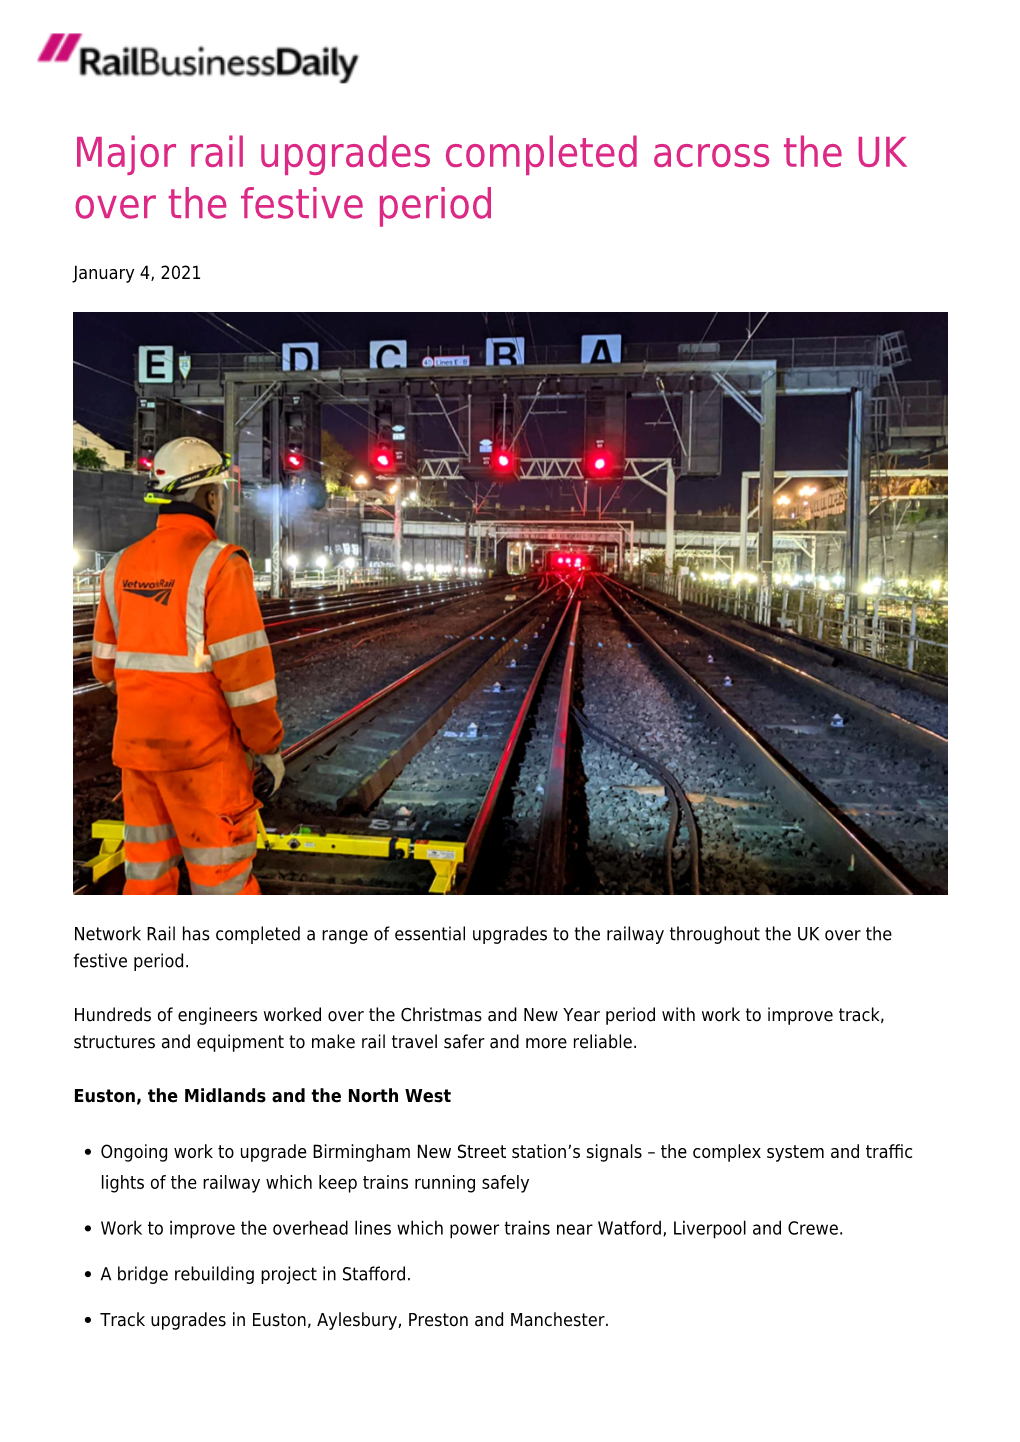 Major Rail Upgrades Completed Across the UK Over the Festive Period